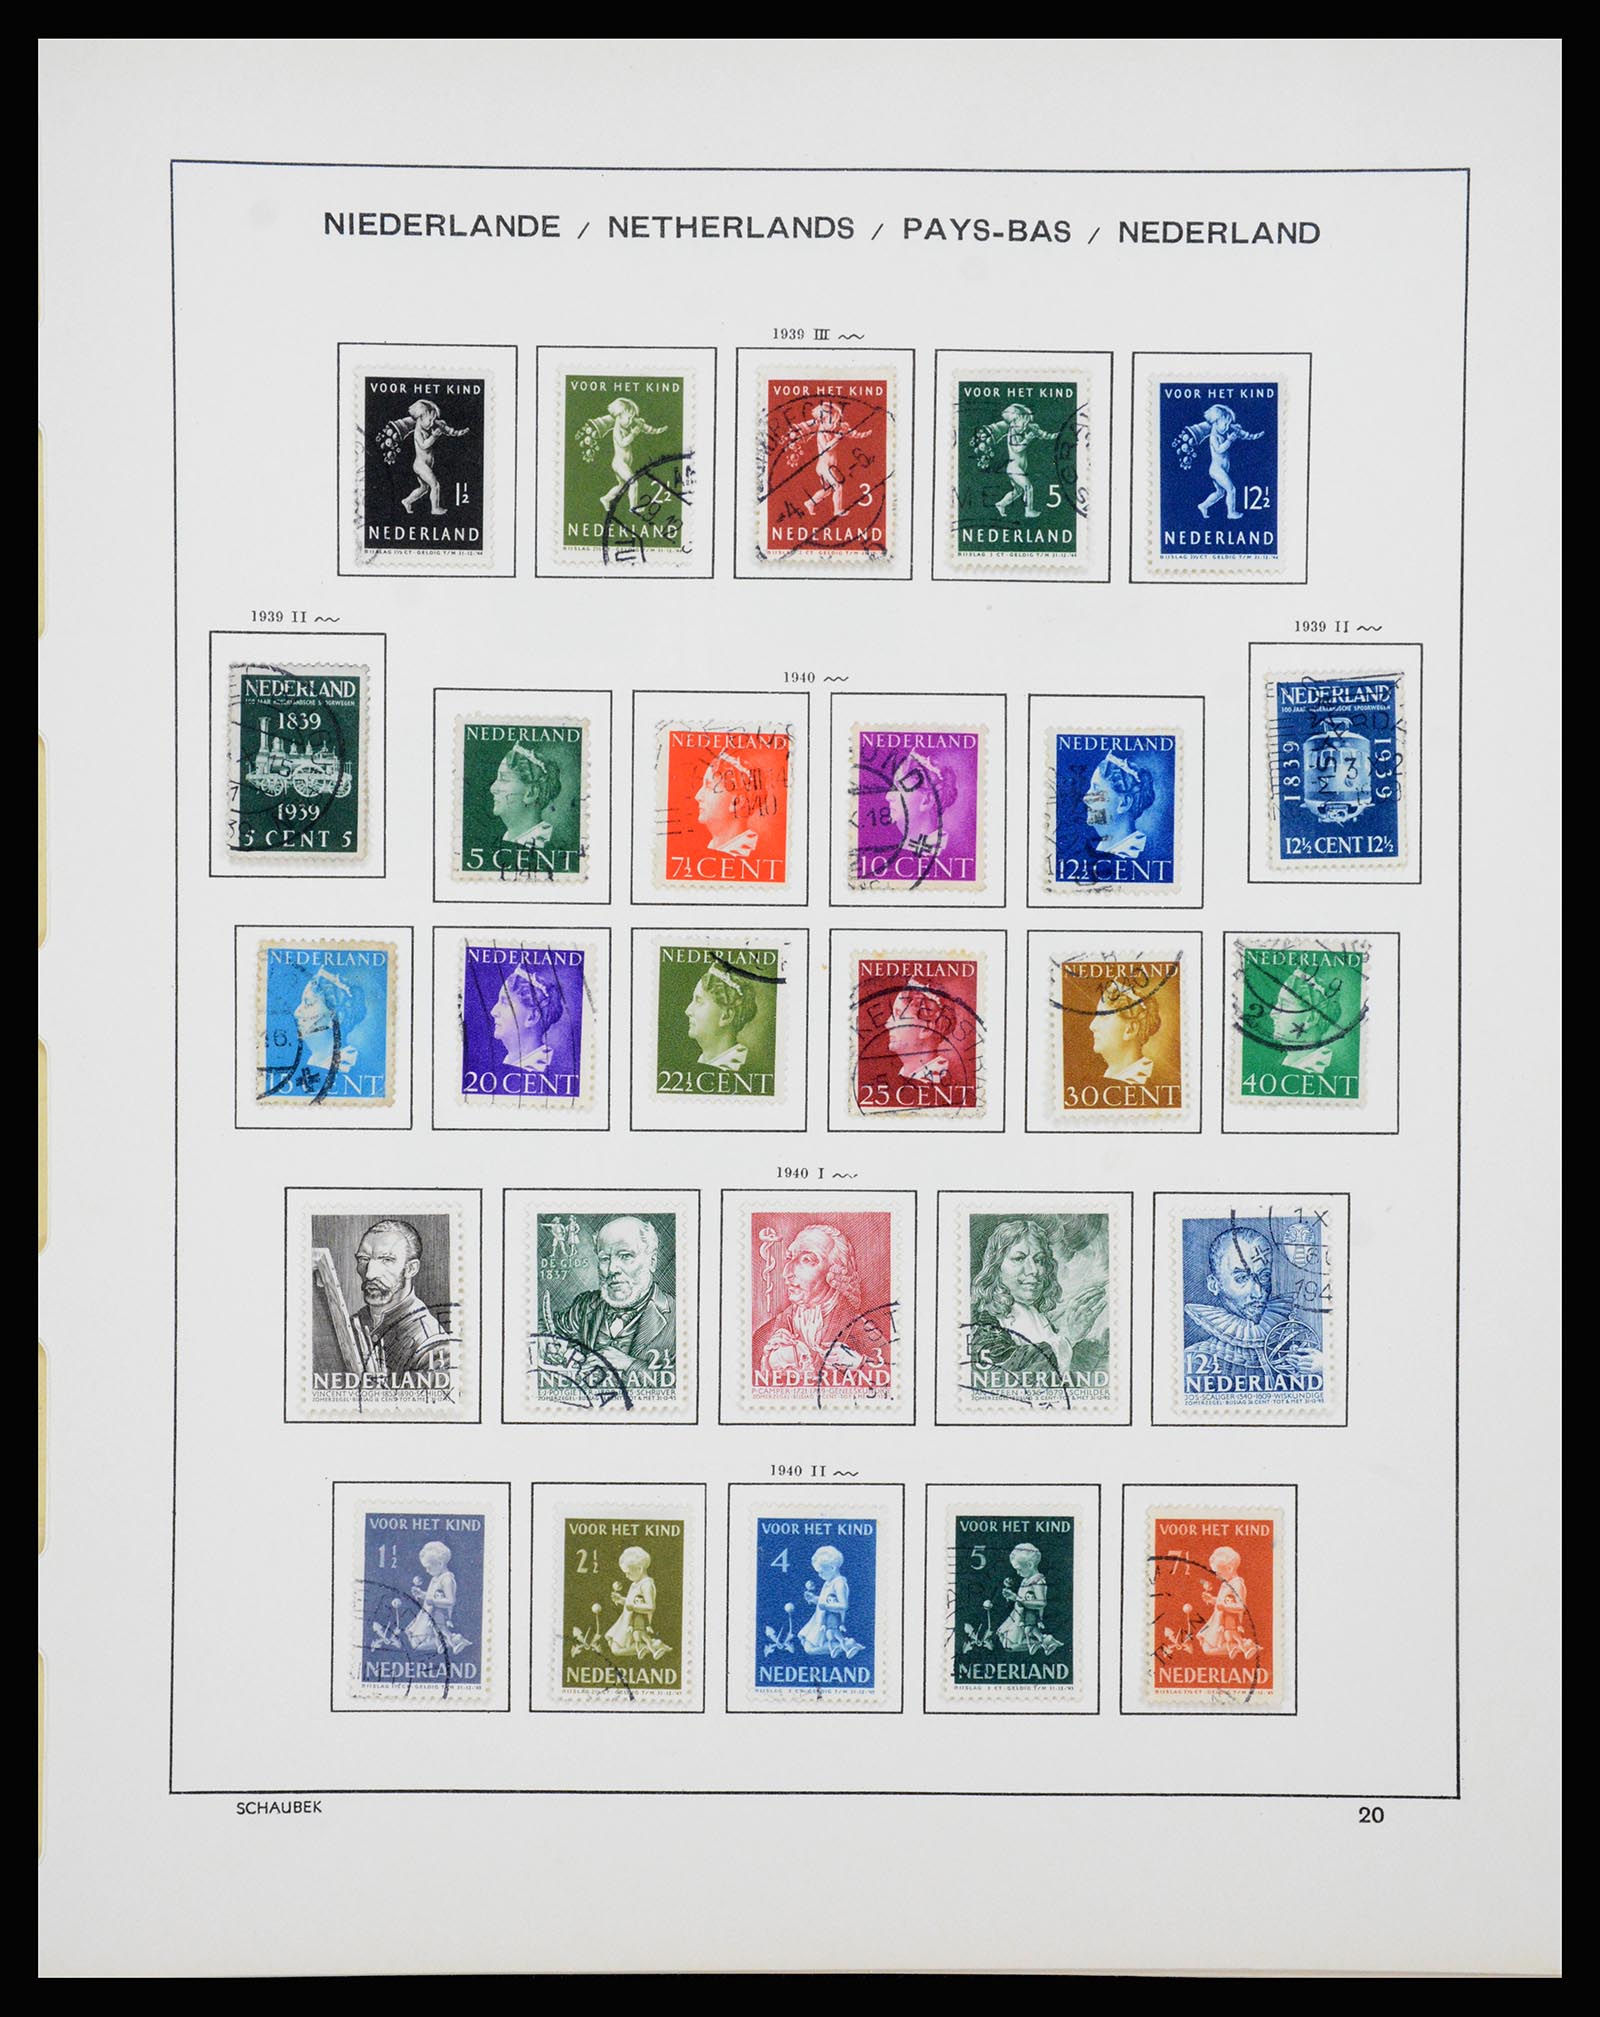 37237 019 - Stamp collection 37237 Netherlands 1852-1944.